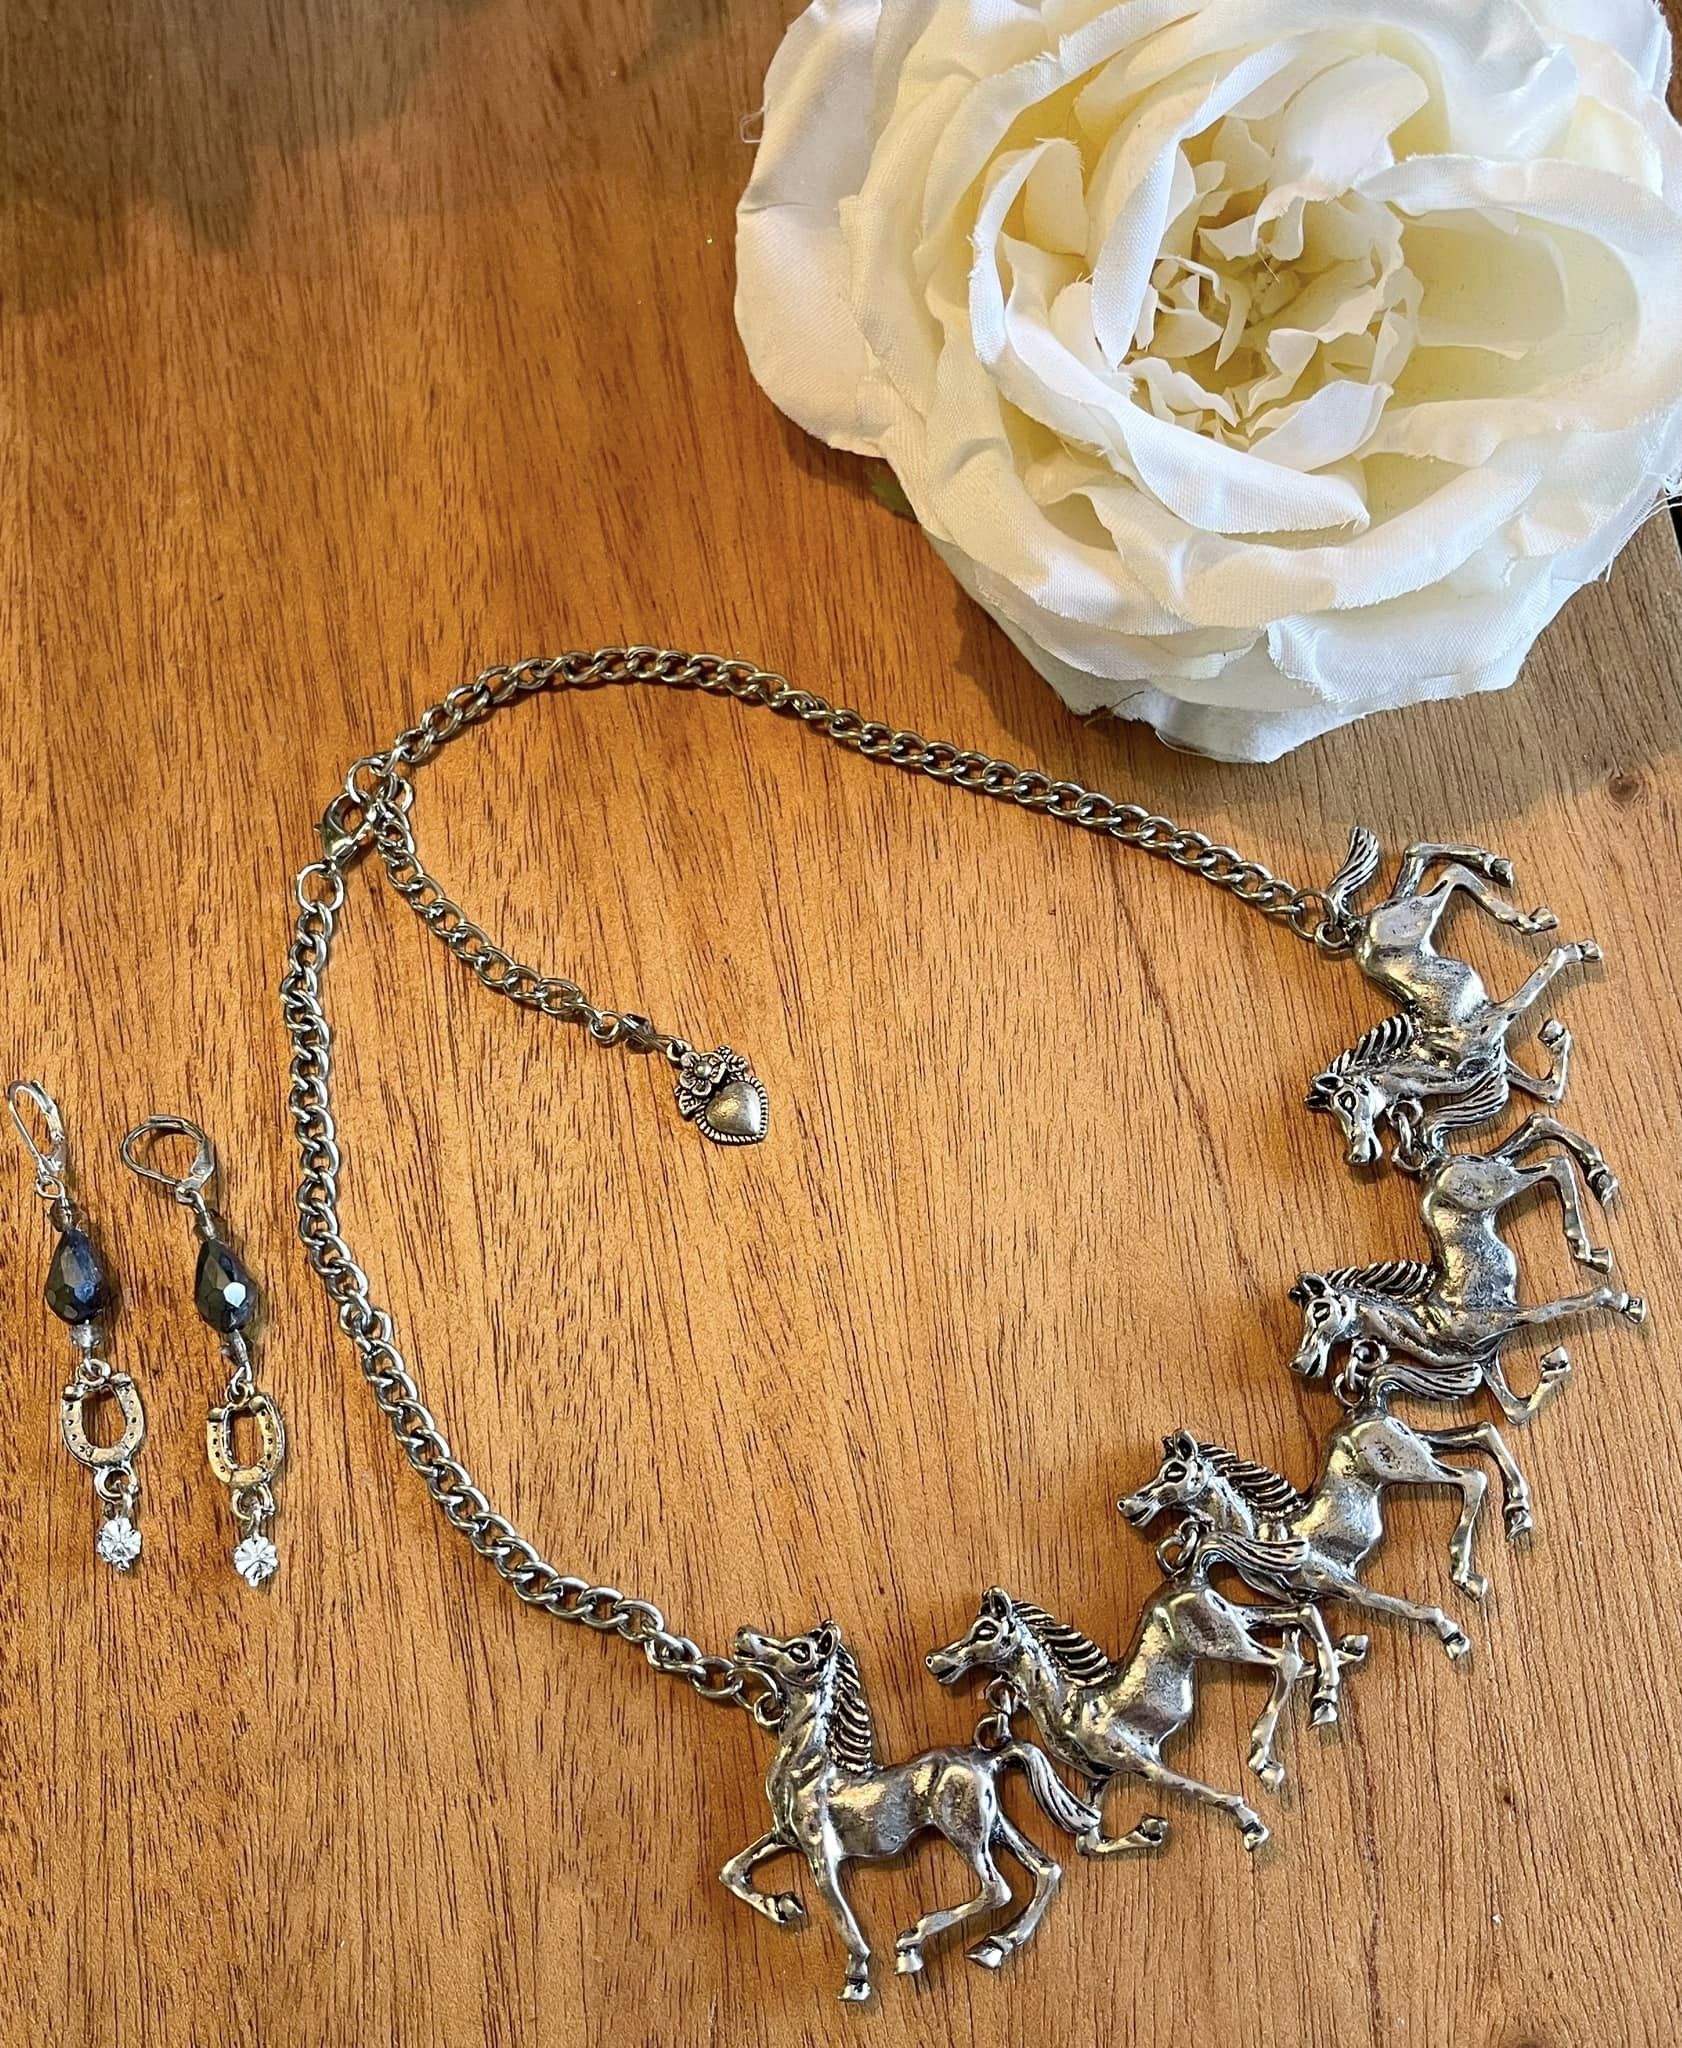 HORSE LOVIN' COWGIRL NECKLACE SET Custom Antique Silver Western Statement Necklace & Earrings SET LAST ONE